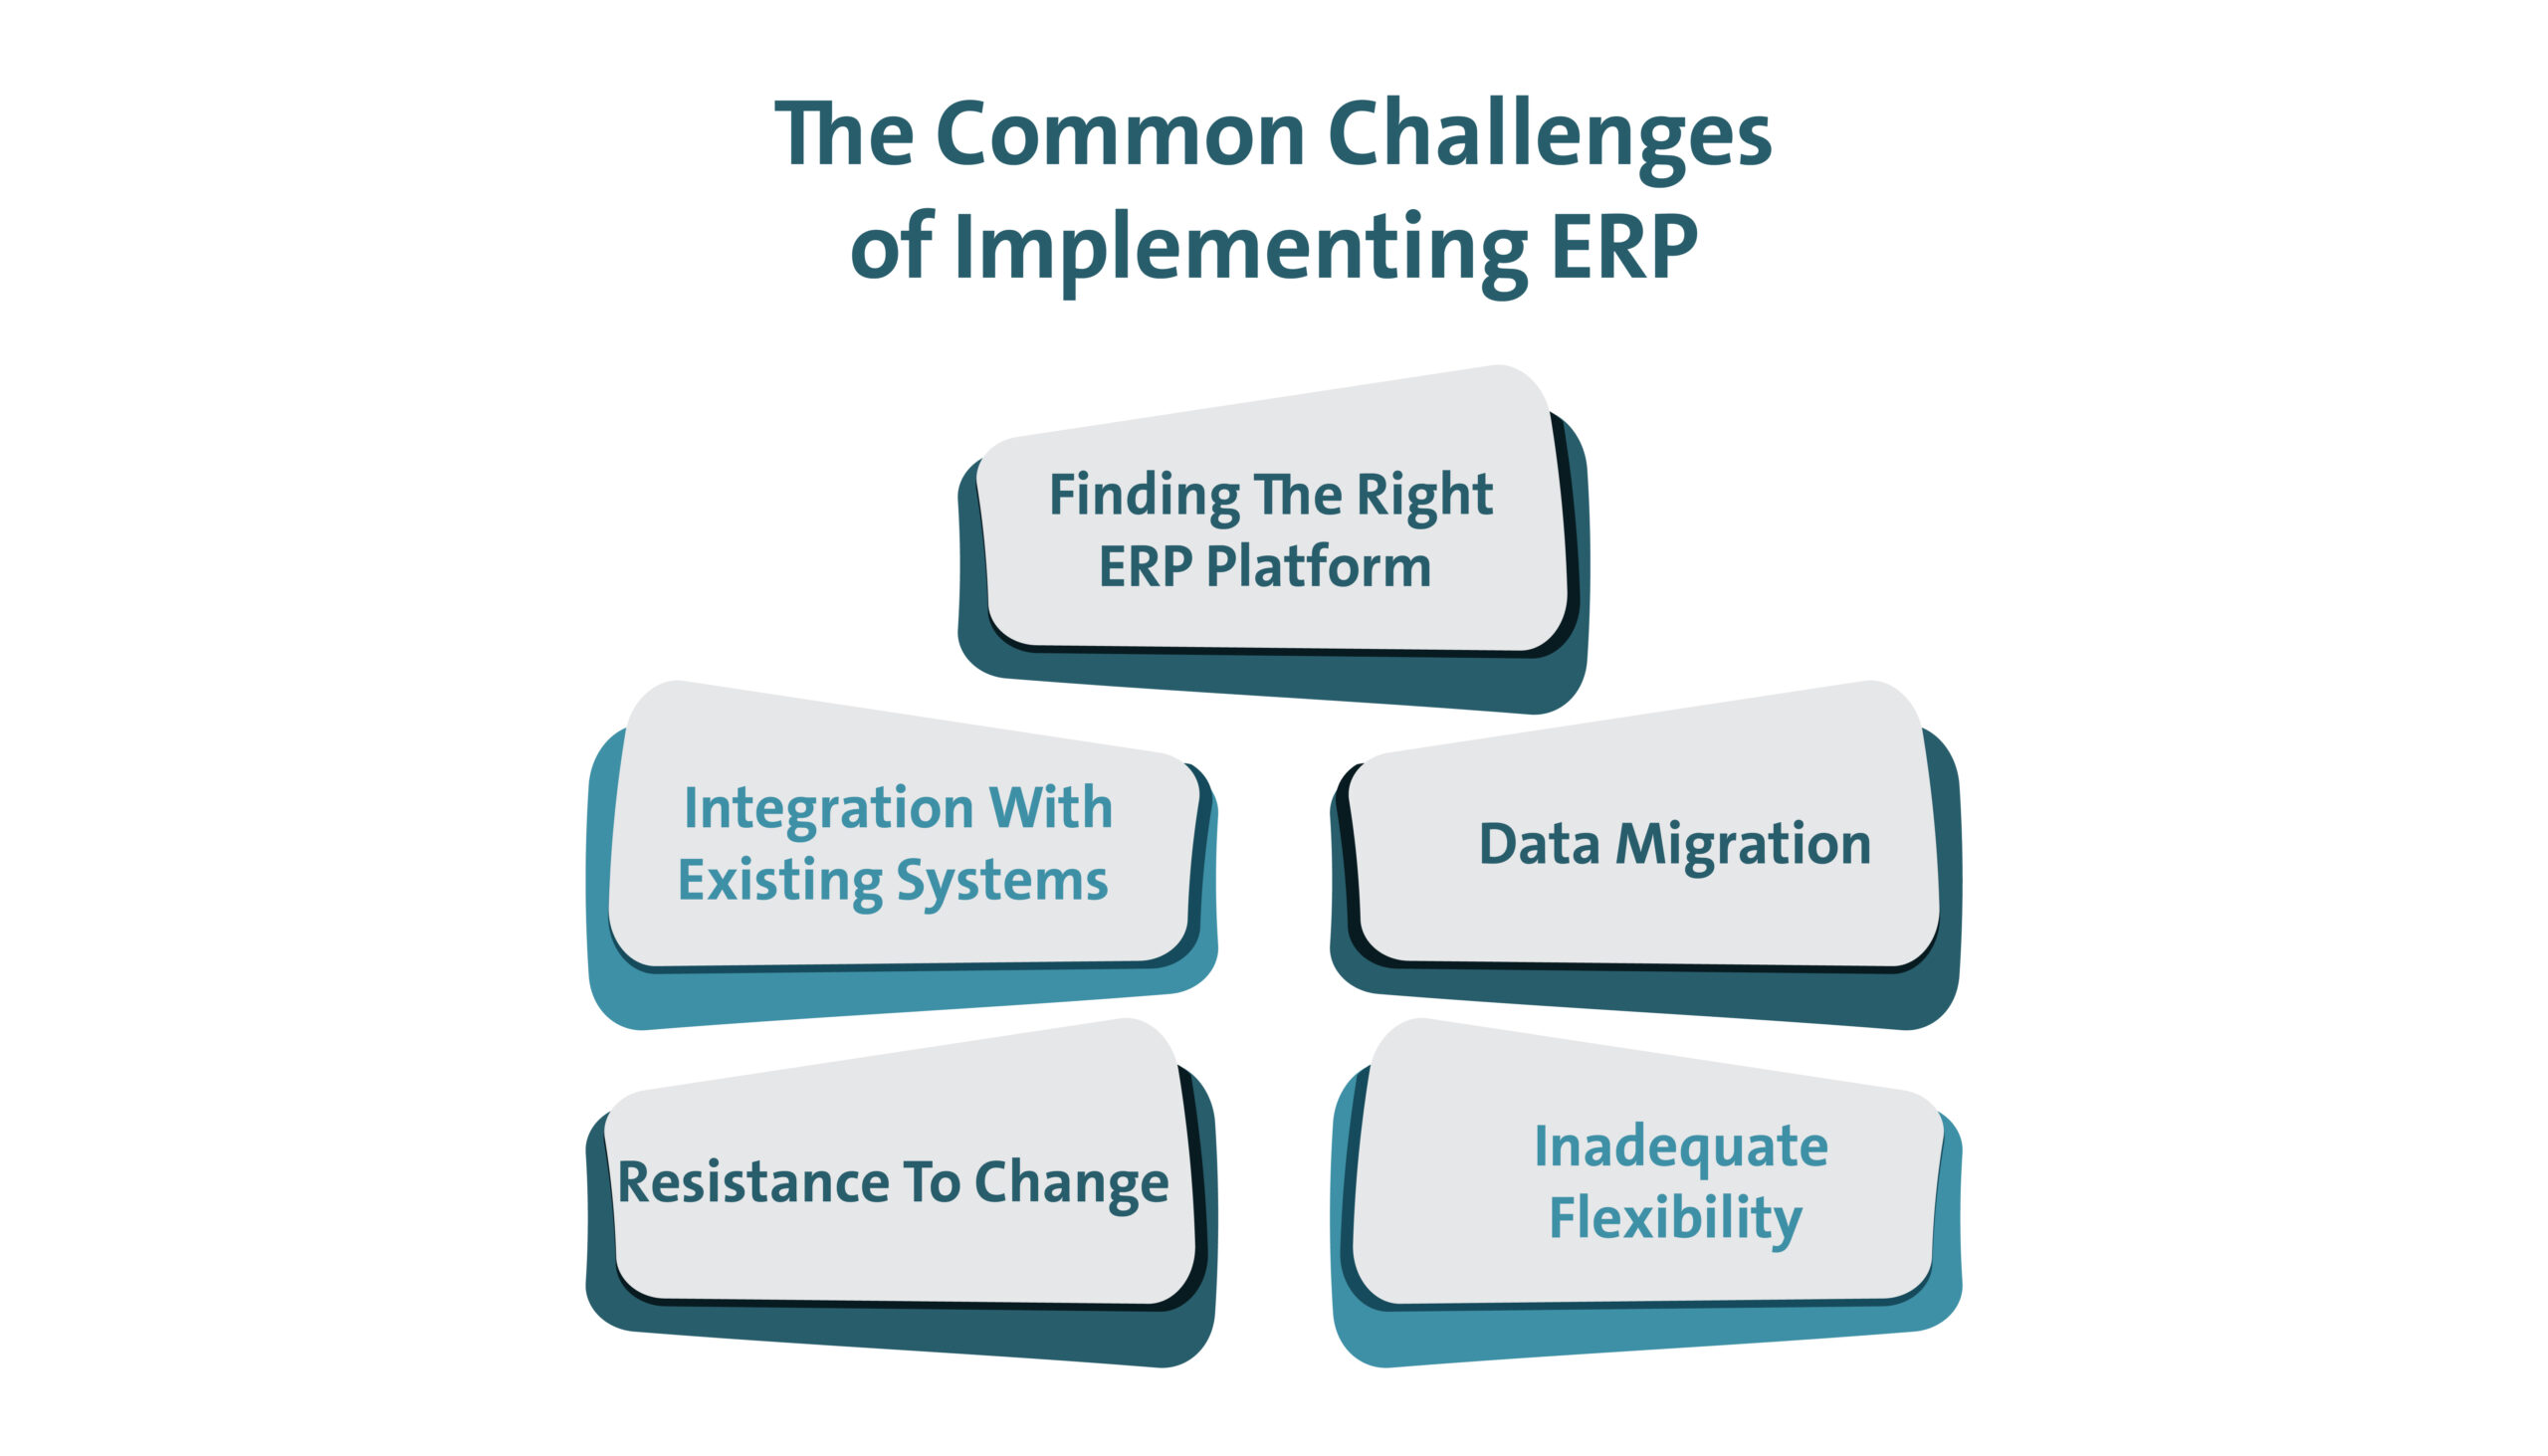 Fig 1: The Common Challenges of Implementing ERP 